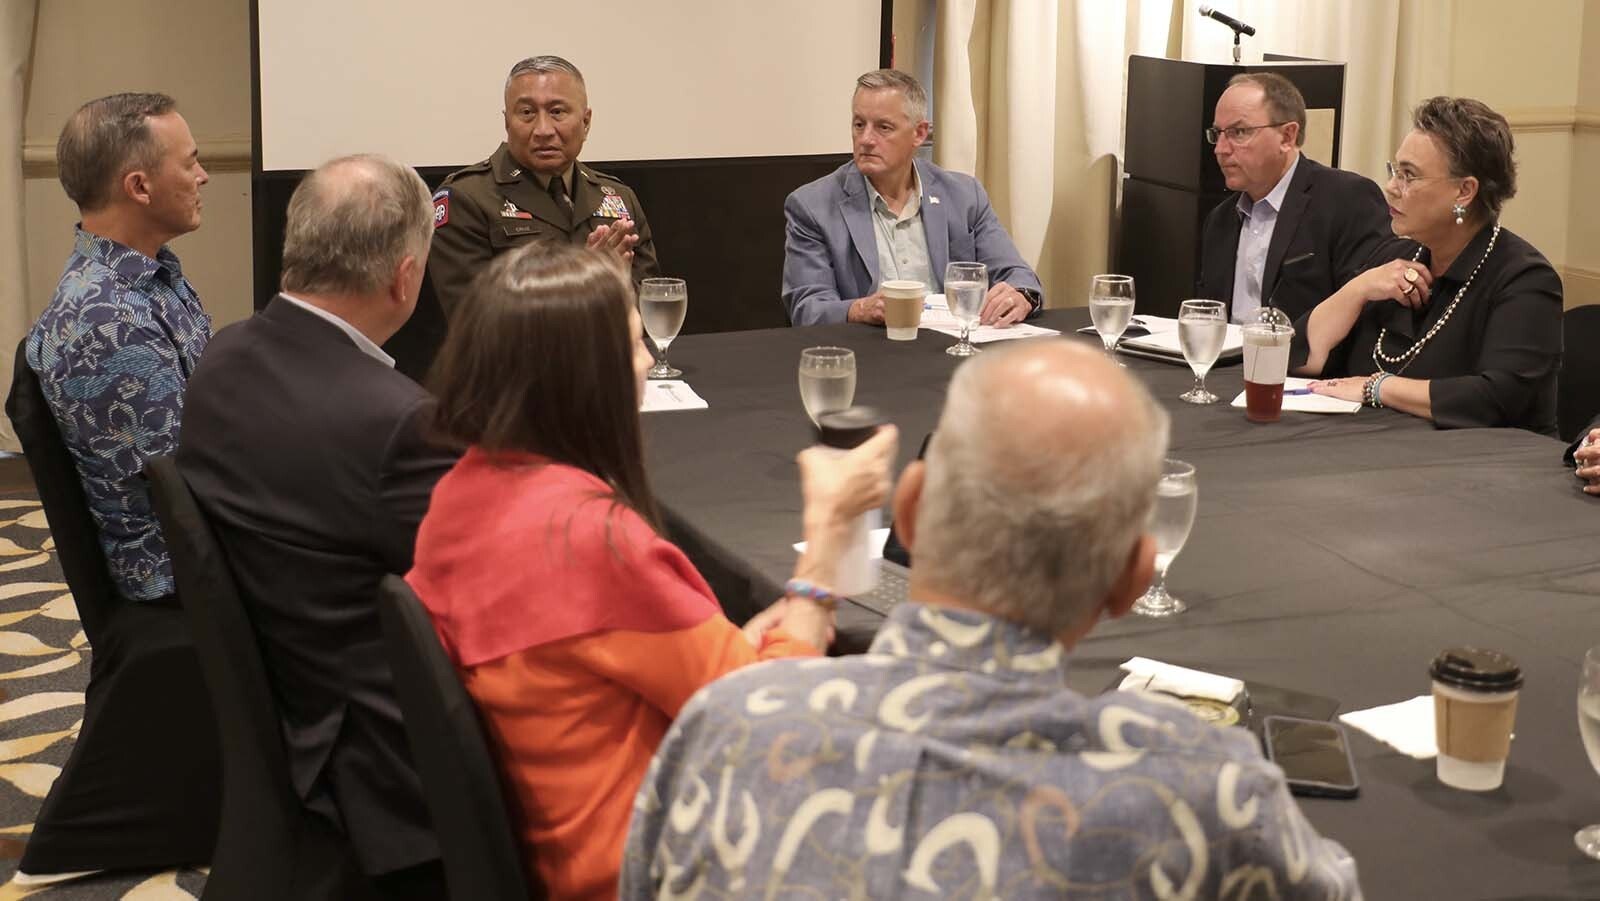 U.S. Rep. Harriet Hageman, far right, talks with officials on Guam about a range of issues, including potential threats from China.